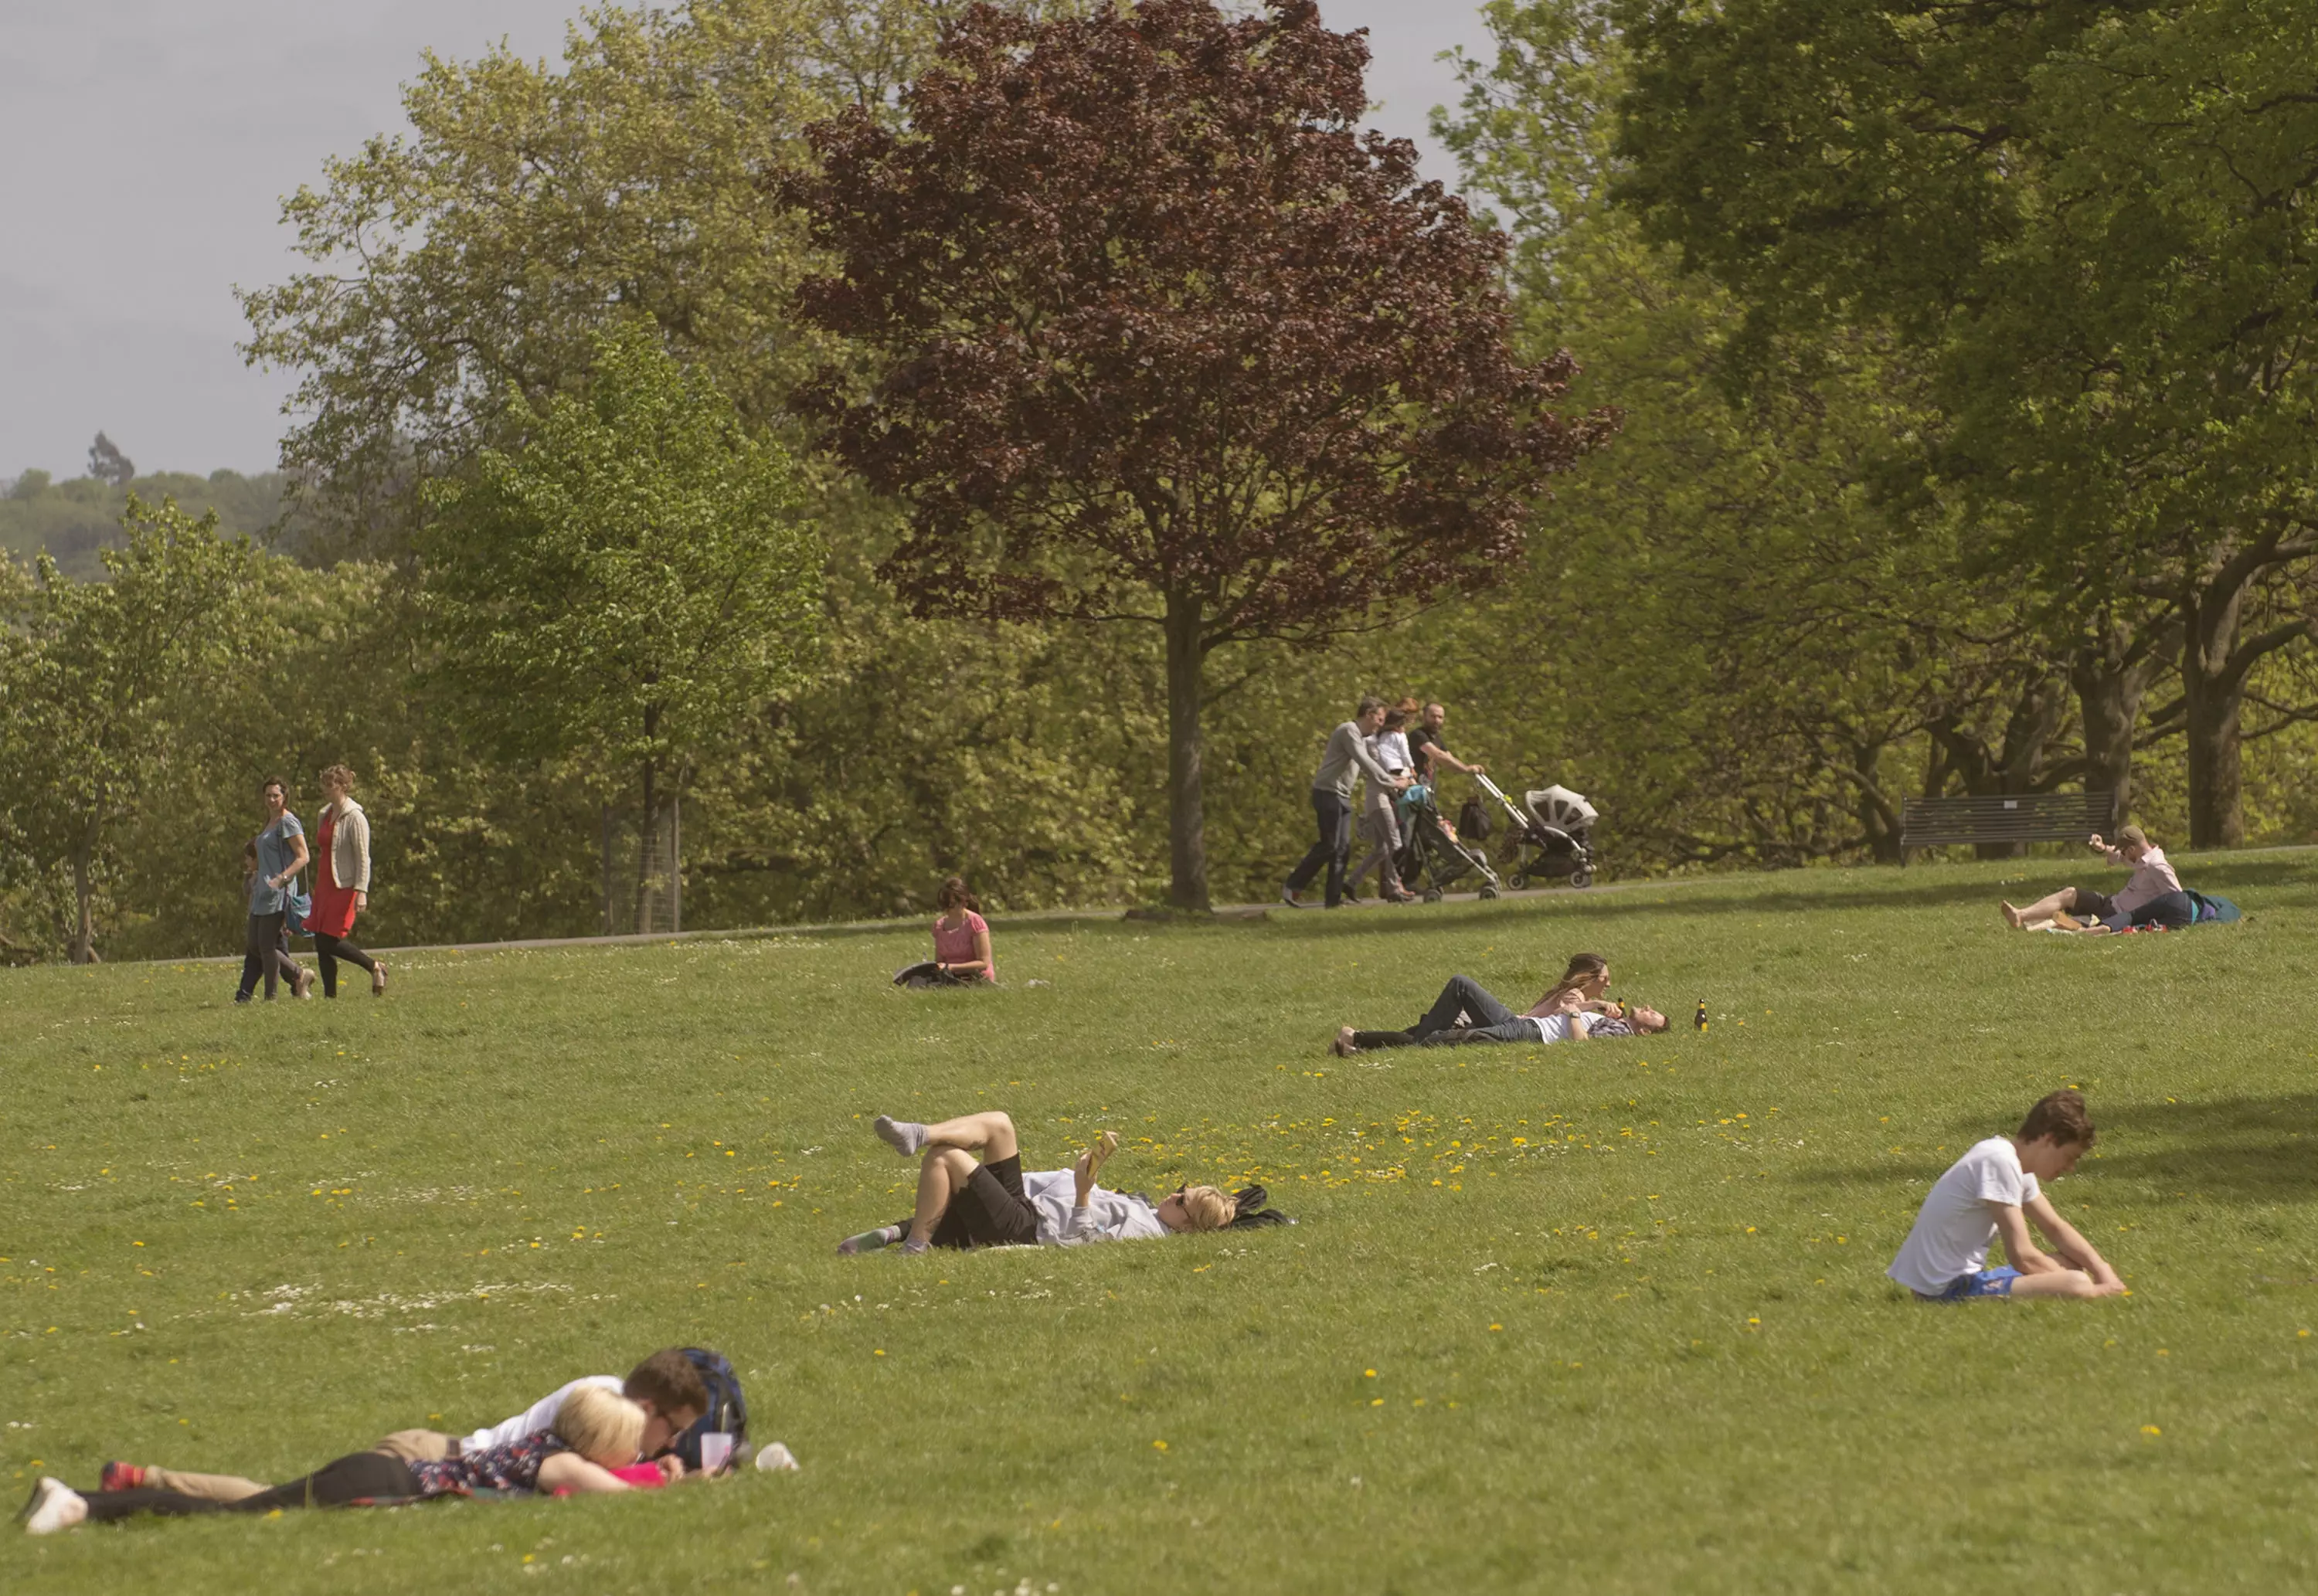 Brockwell Park was closed after 3,000 people visited on Saturday (4 April).